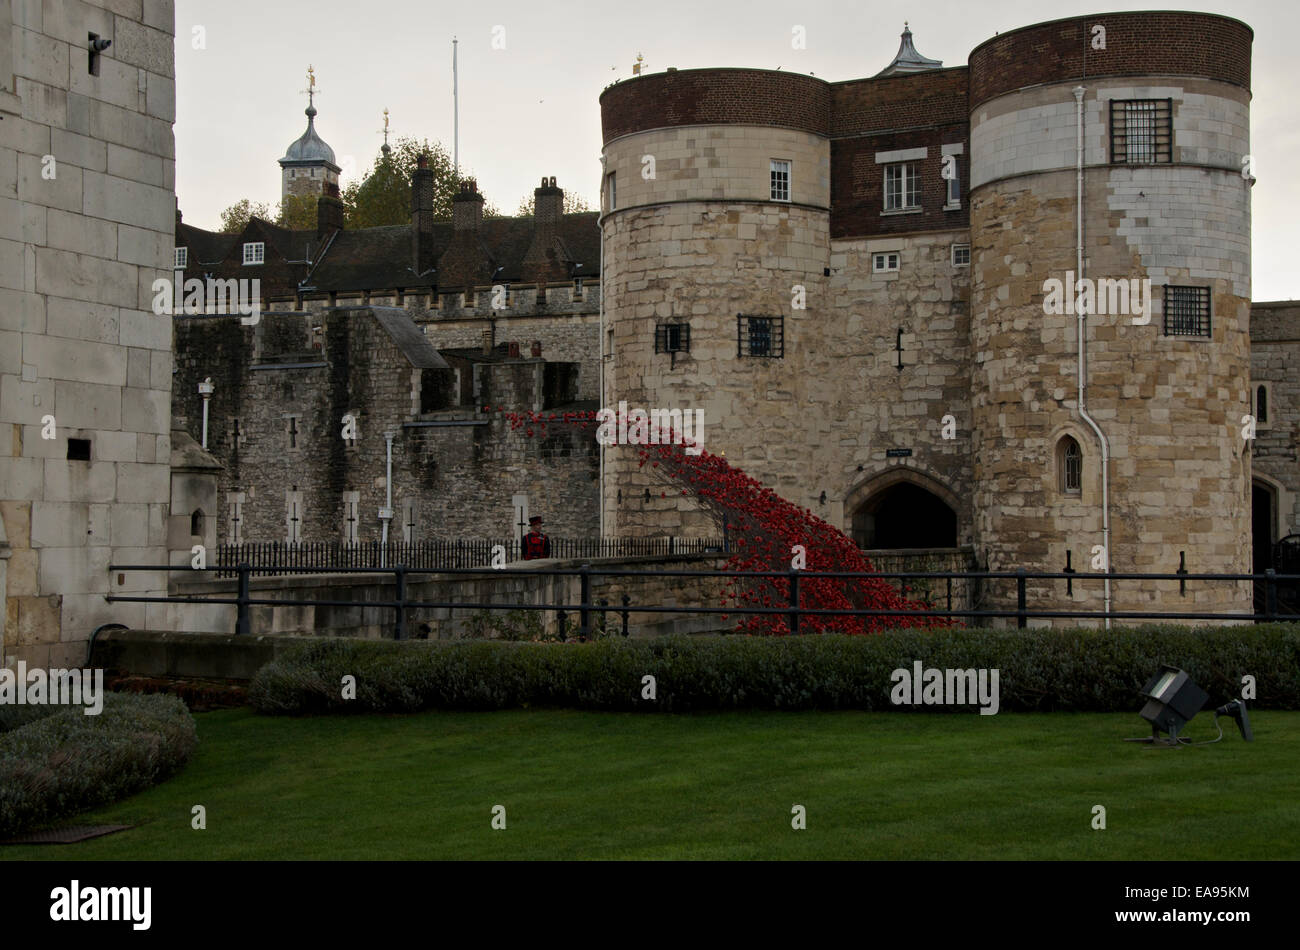 Remembrance Sunday 9th November 2014 at the Tower of London. A Yeoman Guard known as a Beefeater looks out at the wave part of an art instillation entitled Blood Swept Lands and Seas of Red which commemorates the centenary of the start of WW1 in 1914 has attracted millions of visitors. Stock Photo